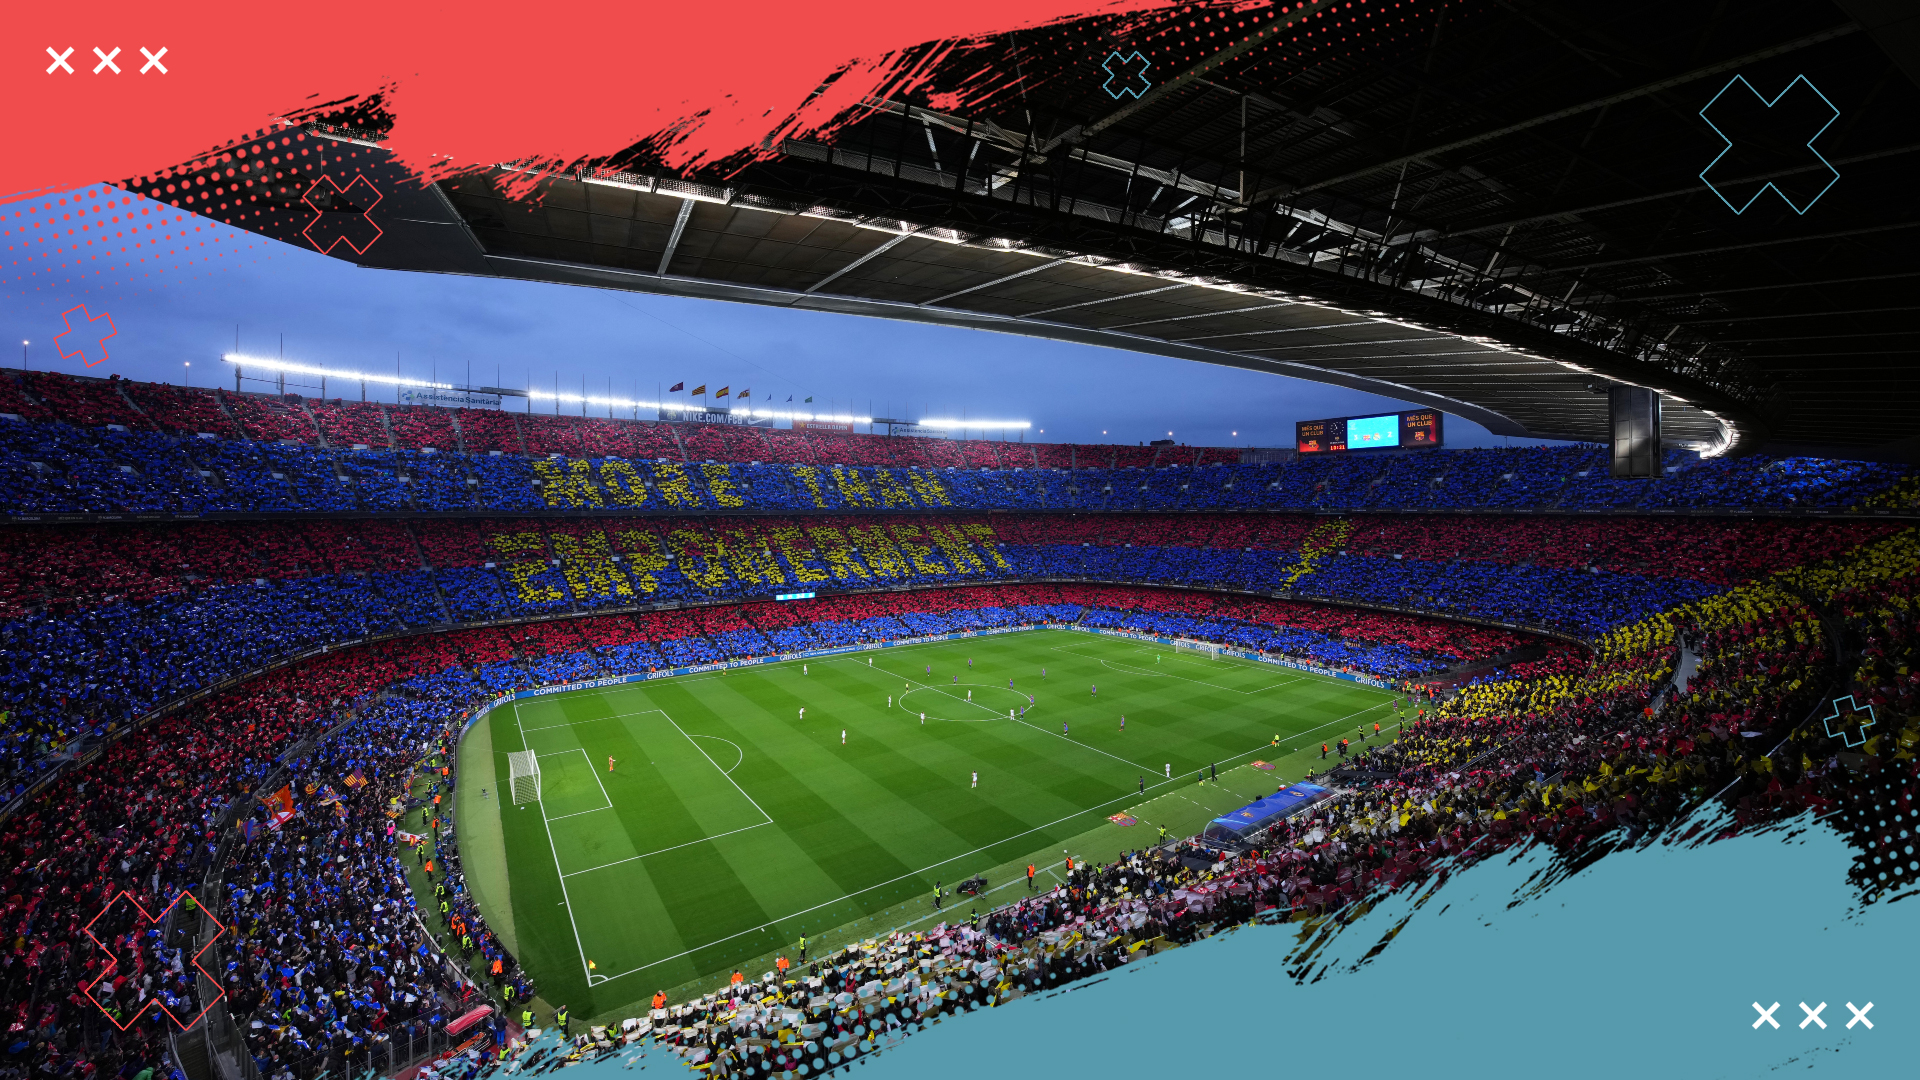 The Best Football Stadiums in the World